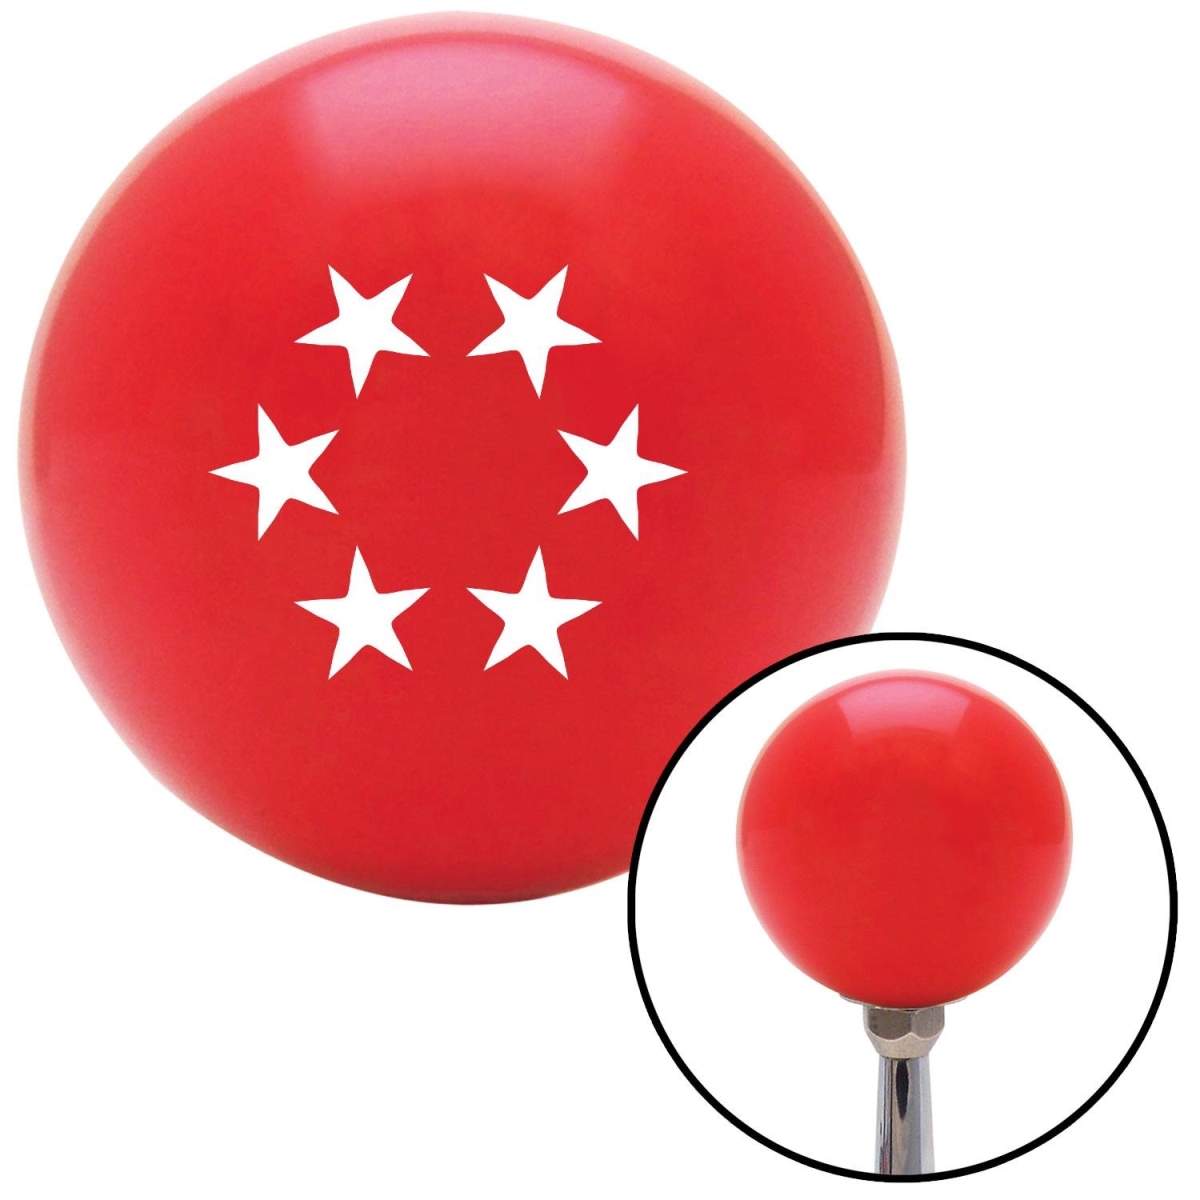 Picture of American Shifter 101338 White 5 Stars in Circle Red Shift Knob with M16 x 1.5 Insert Shifter Auto Manual